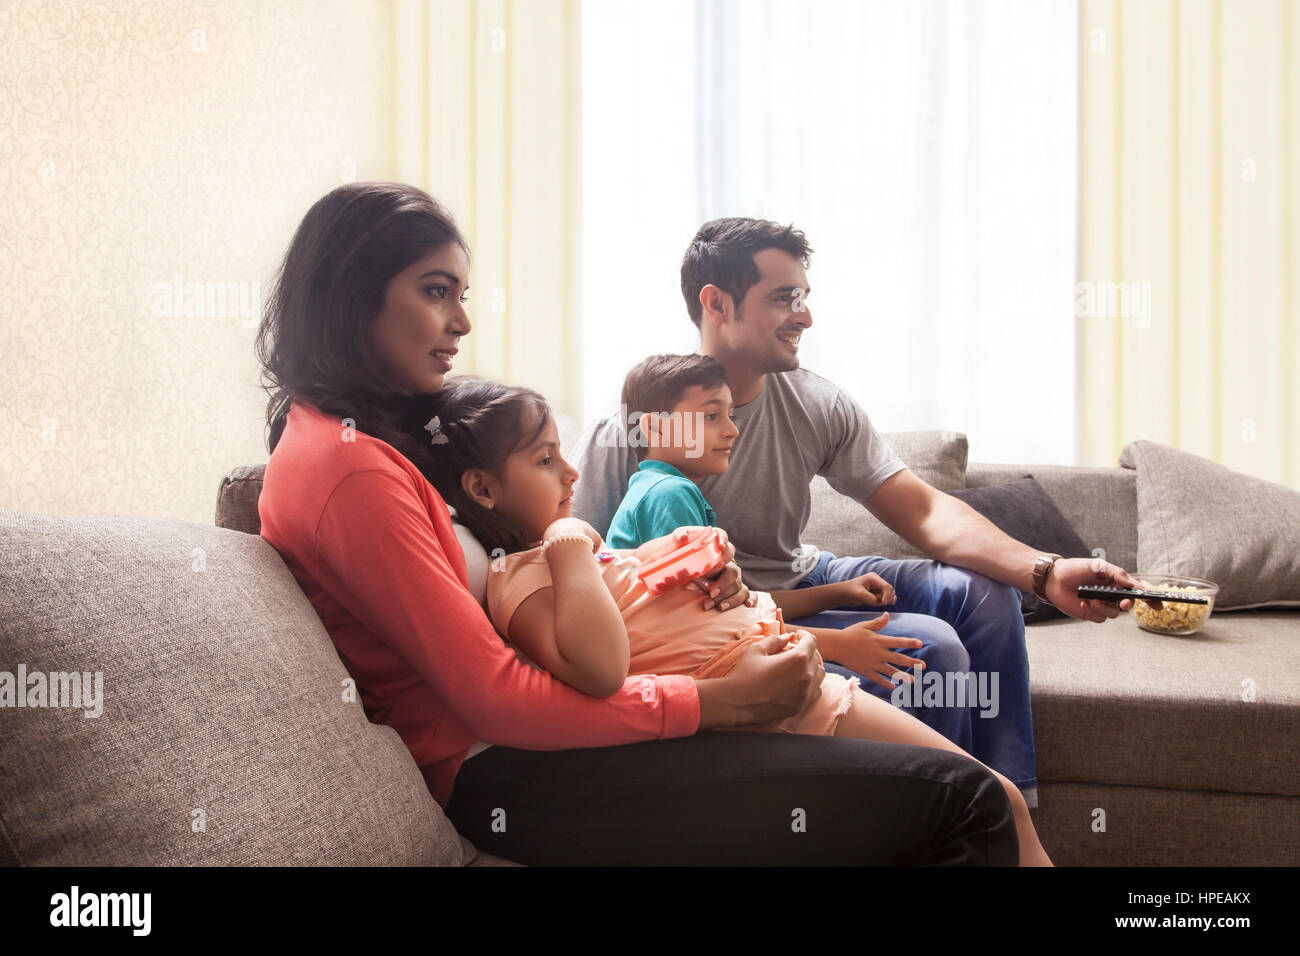 Parents with son and daughter sitting on sofa and watching TV Stock Photo